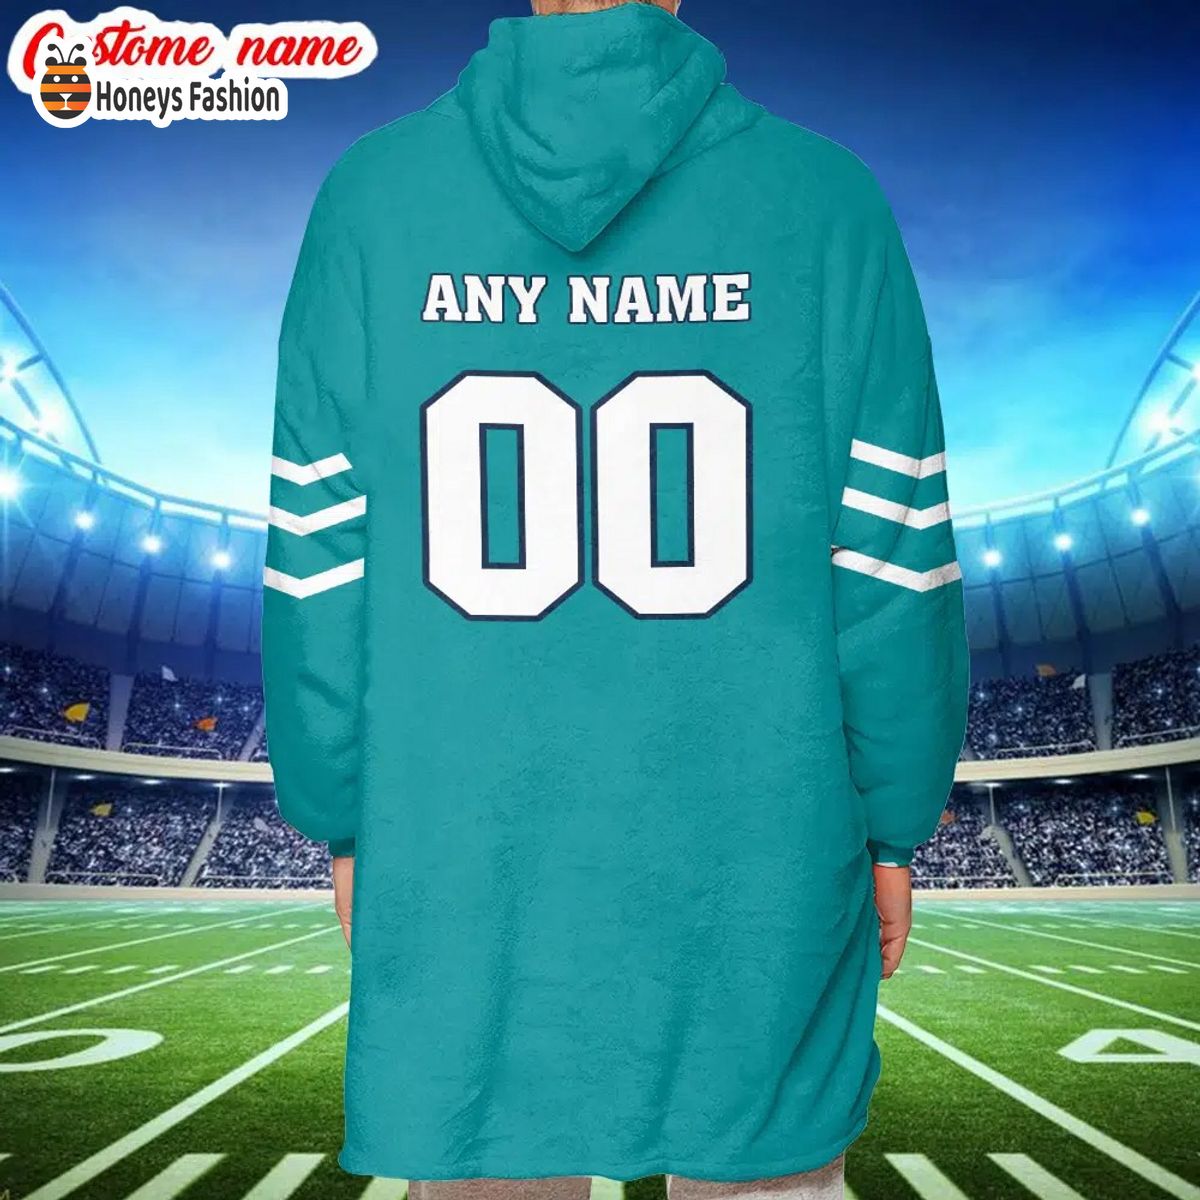 Miami Dolphins NFL Adidas all day i dream about Dolphins blanket hoodie